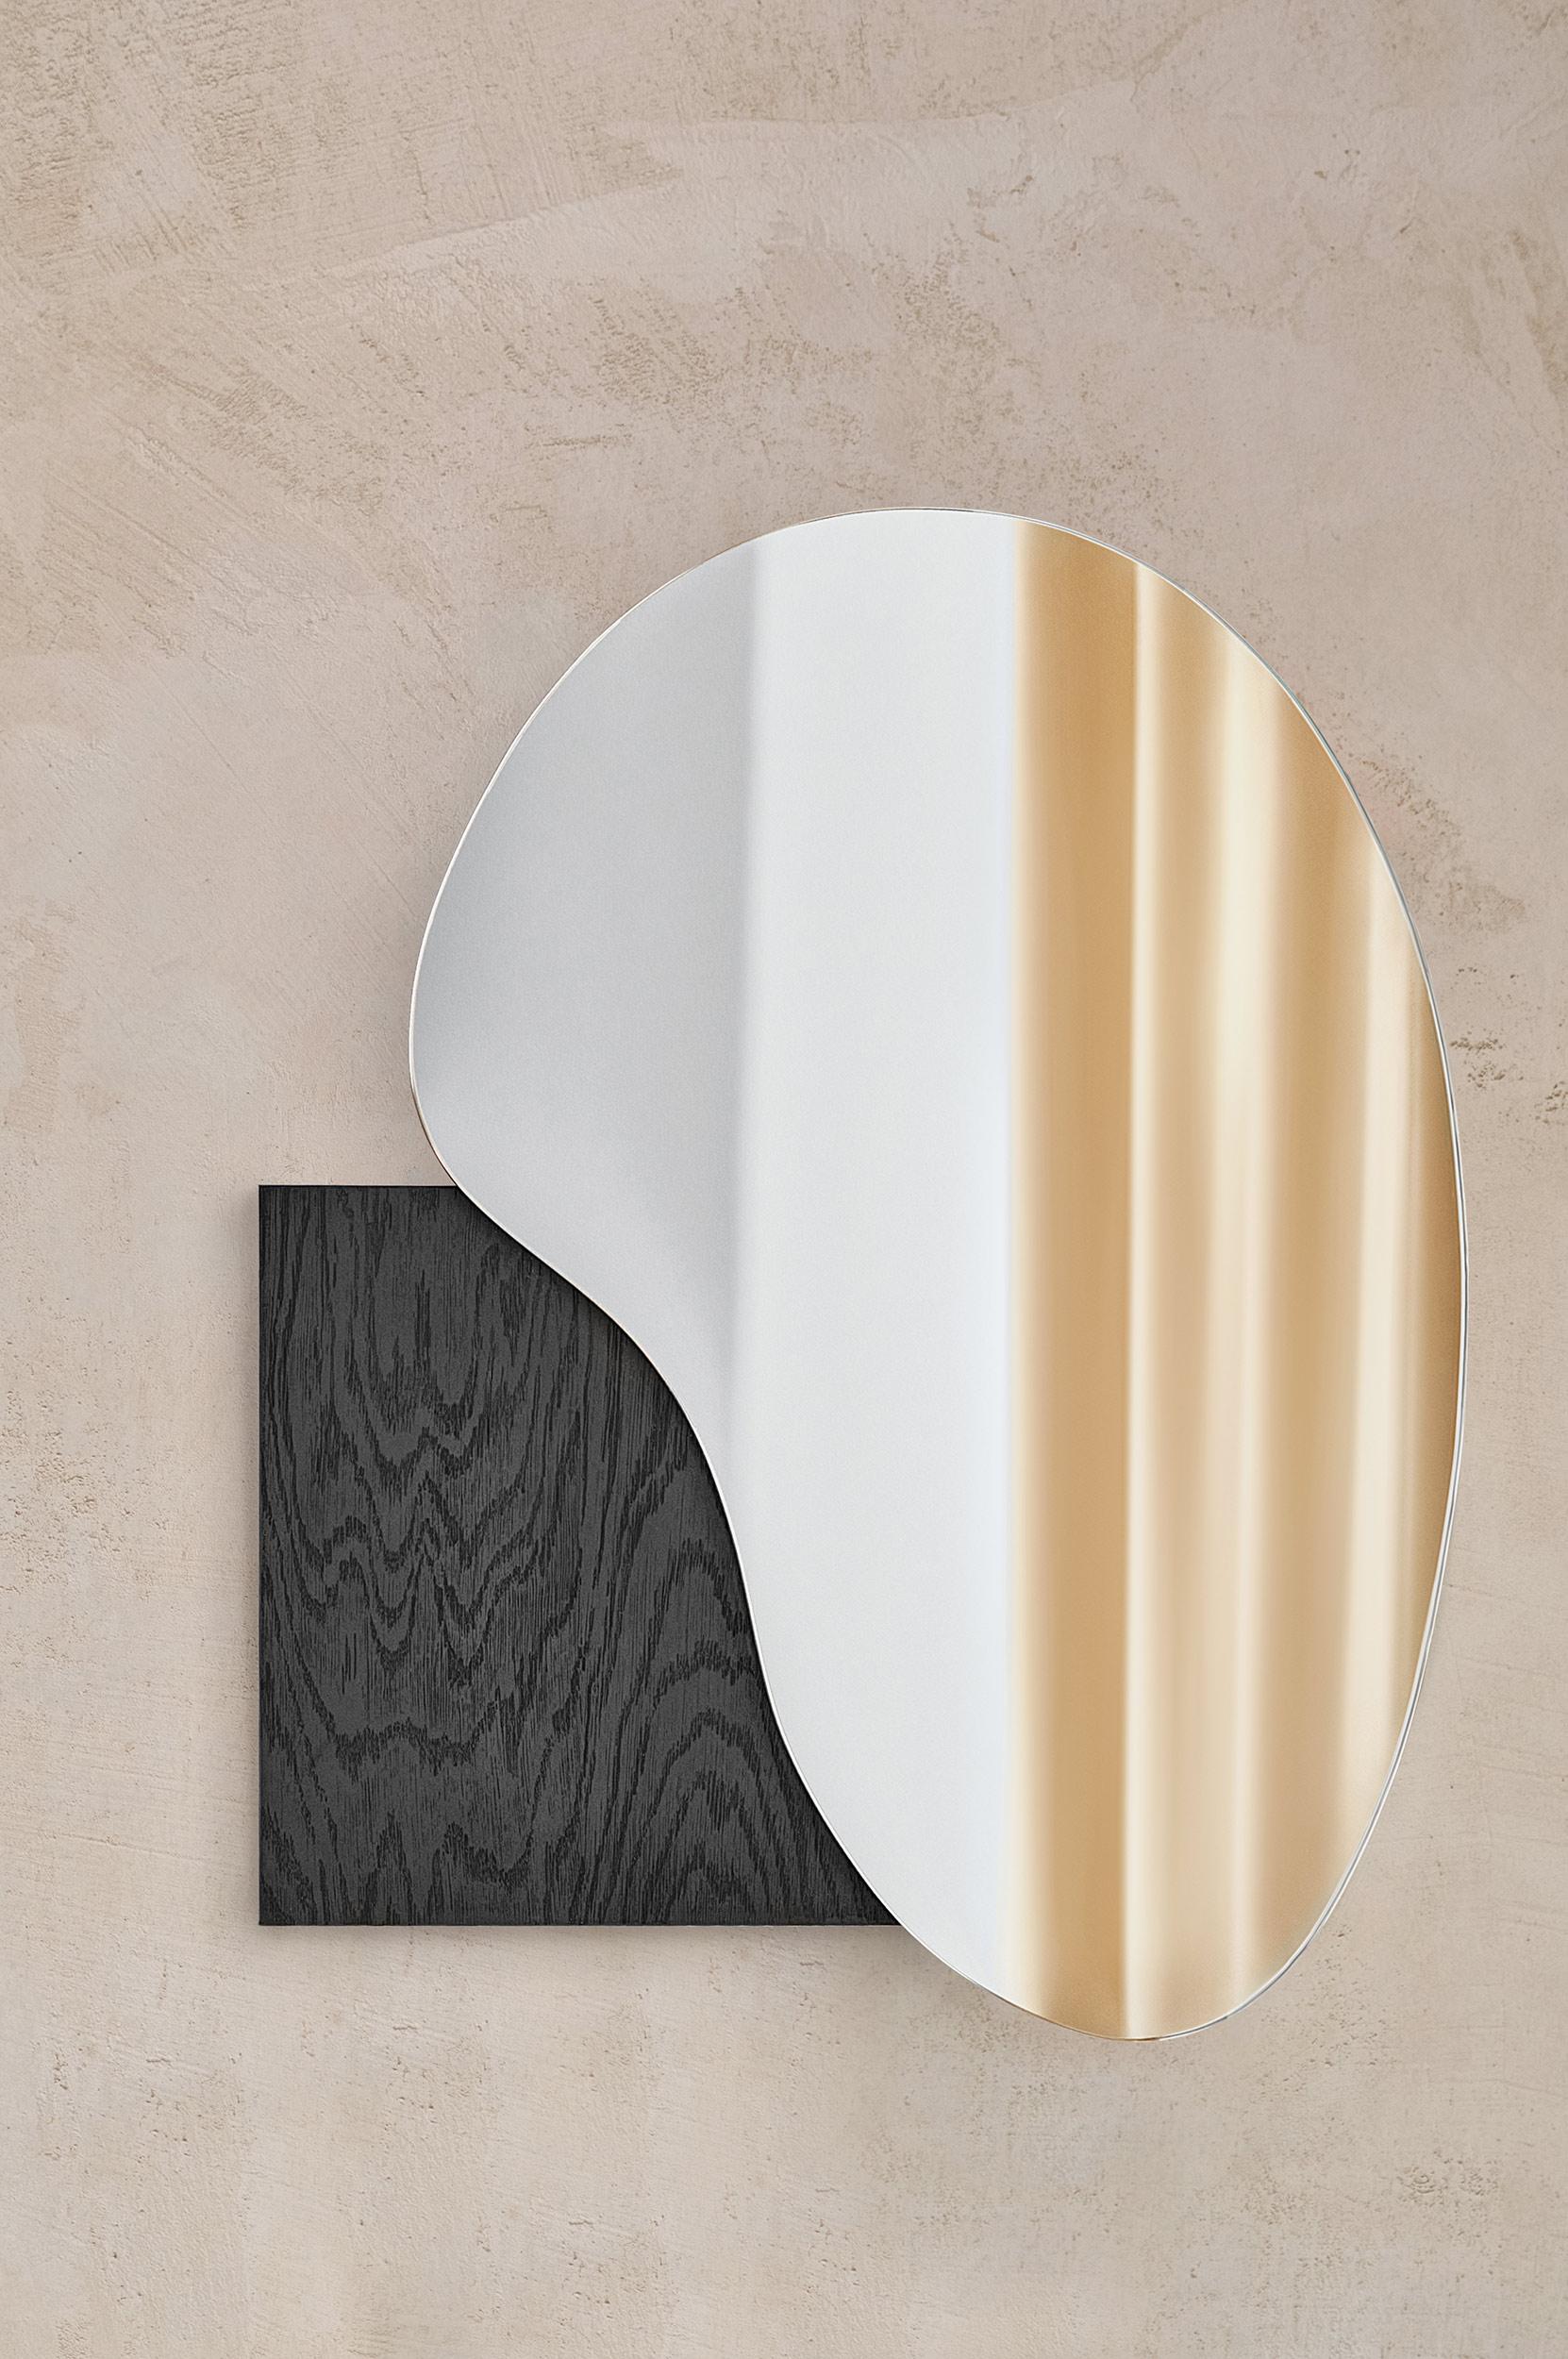 Painted Modern Wall Mirror Lake 4 by Noom with Madrone Veneered Wood Base For Sale